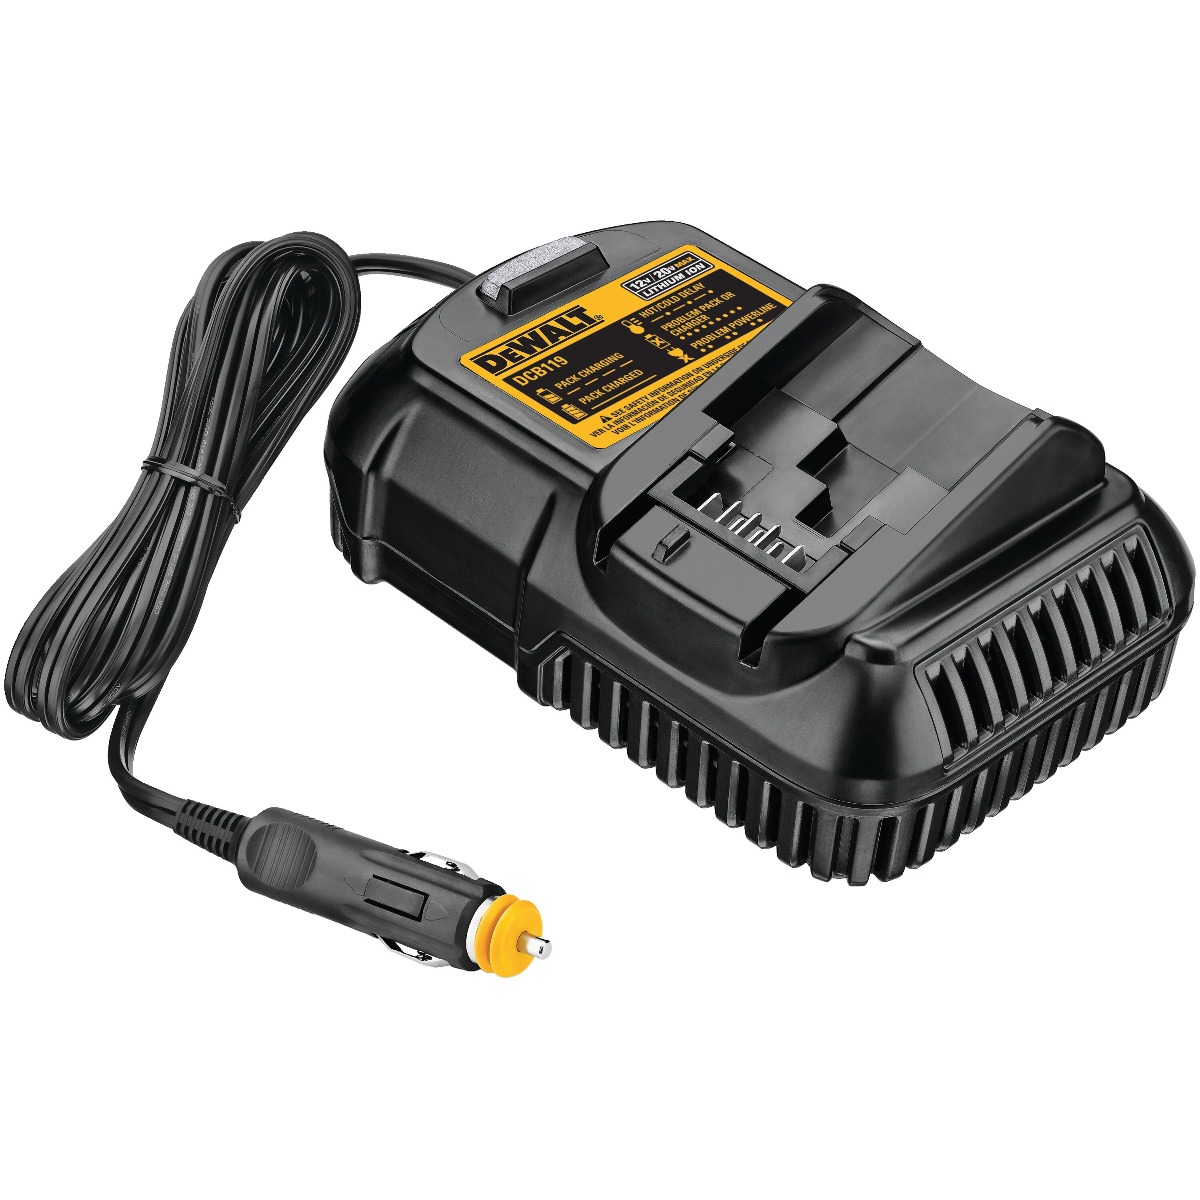 12V MAX* - 20V MAX*  VEHICLE LITHIUM ION BATTERY CHARGER